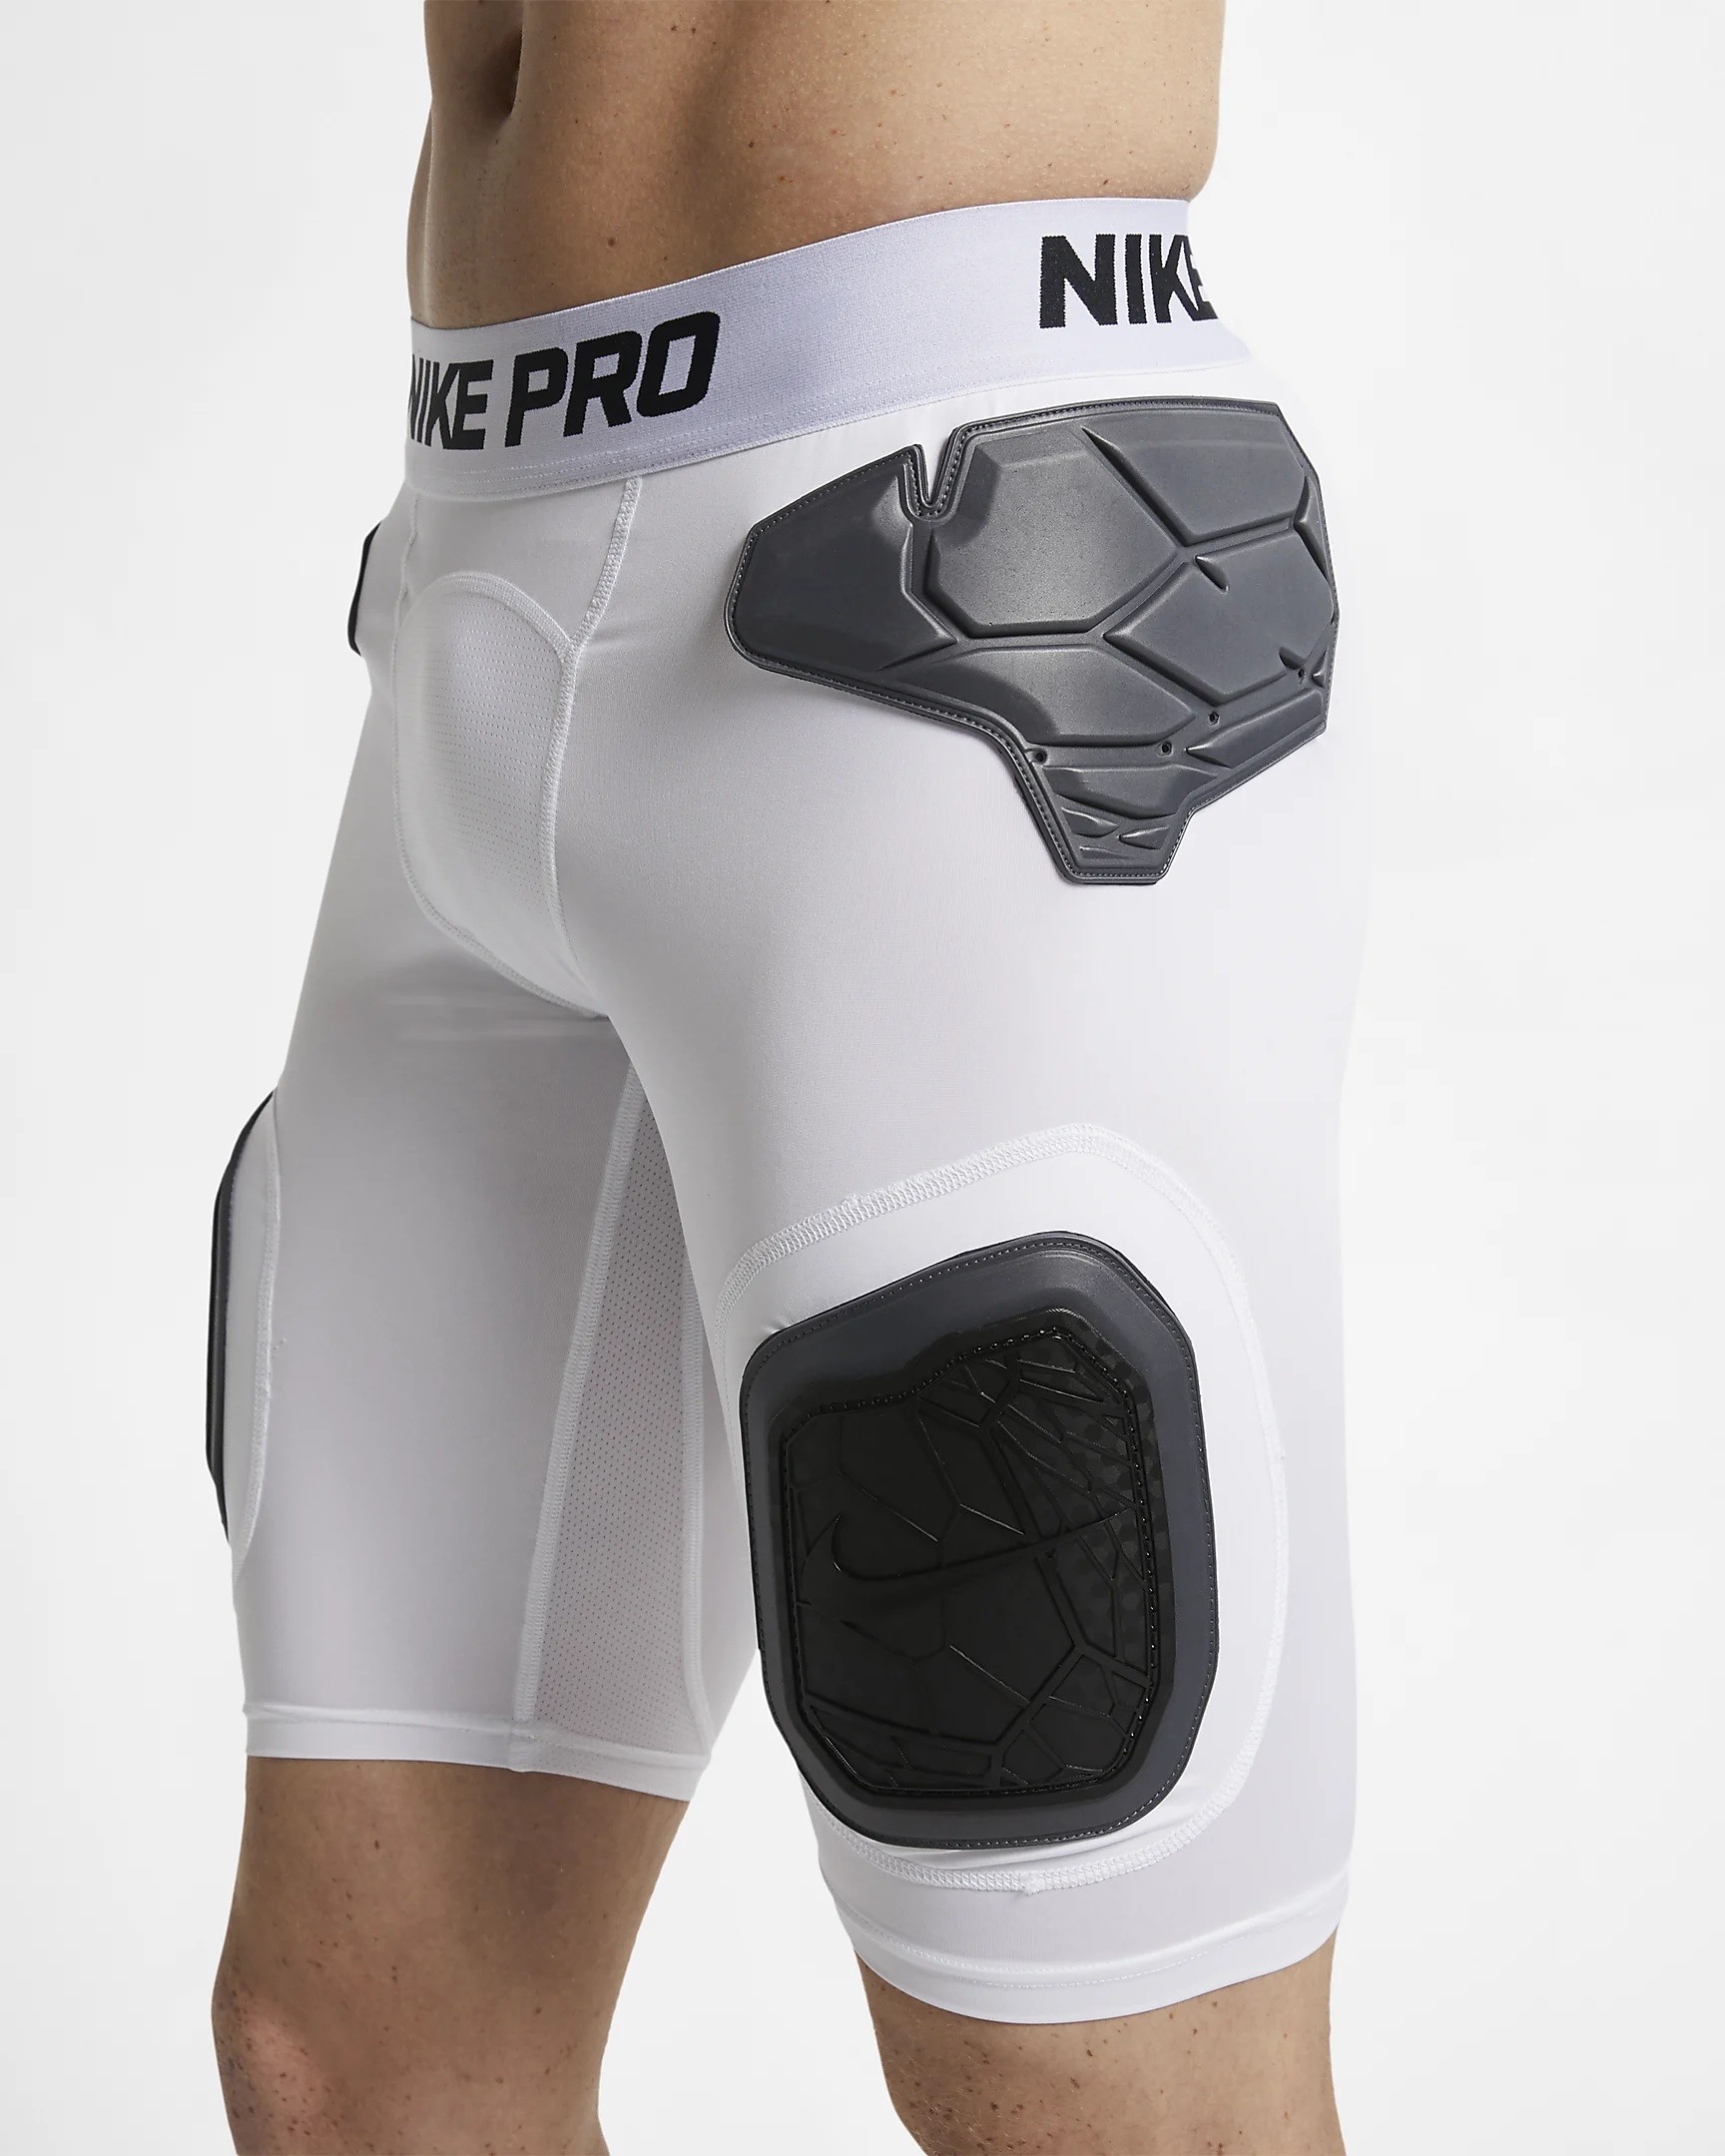 Nike Pro HyperStrong shorts 5 protections pour le football américain